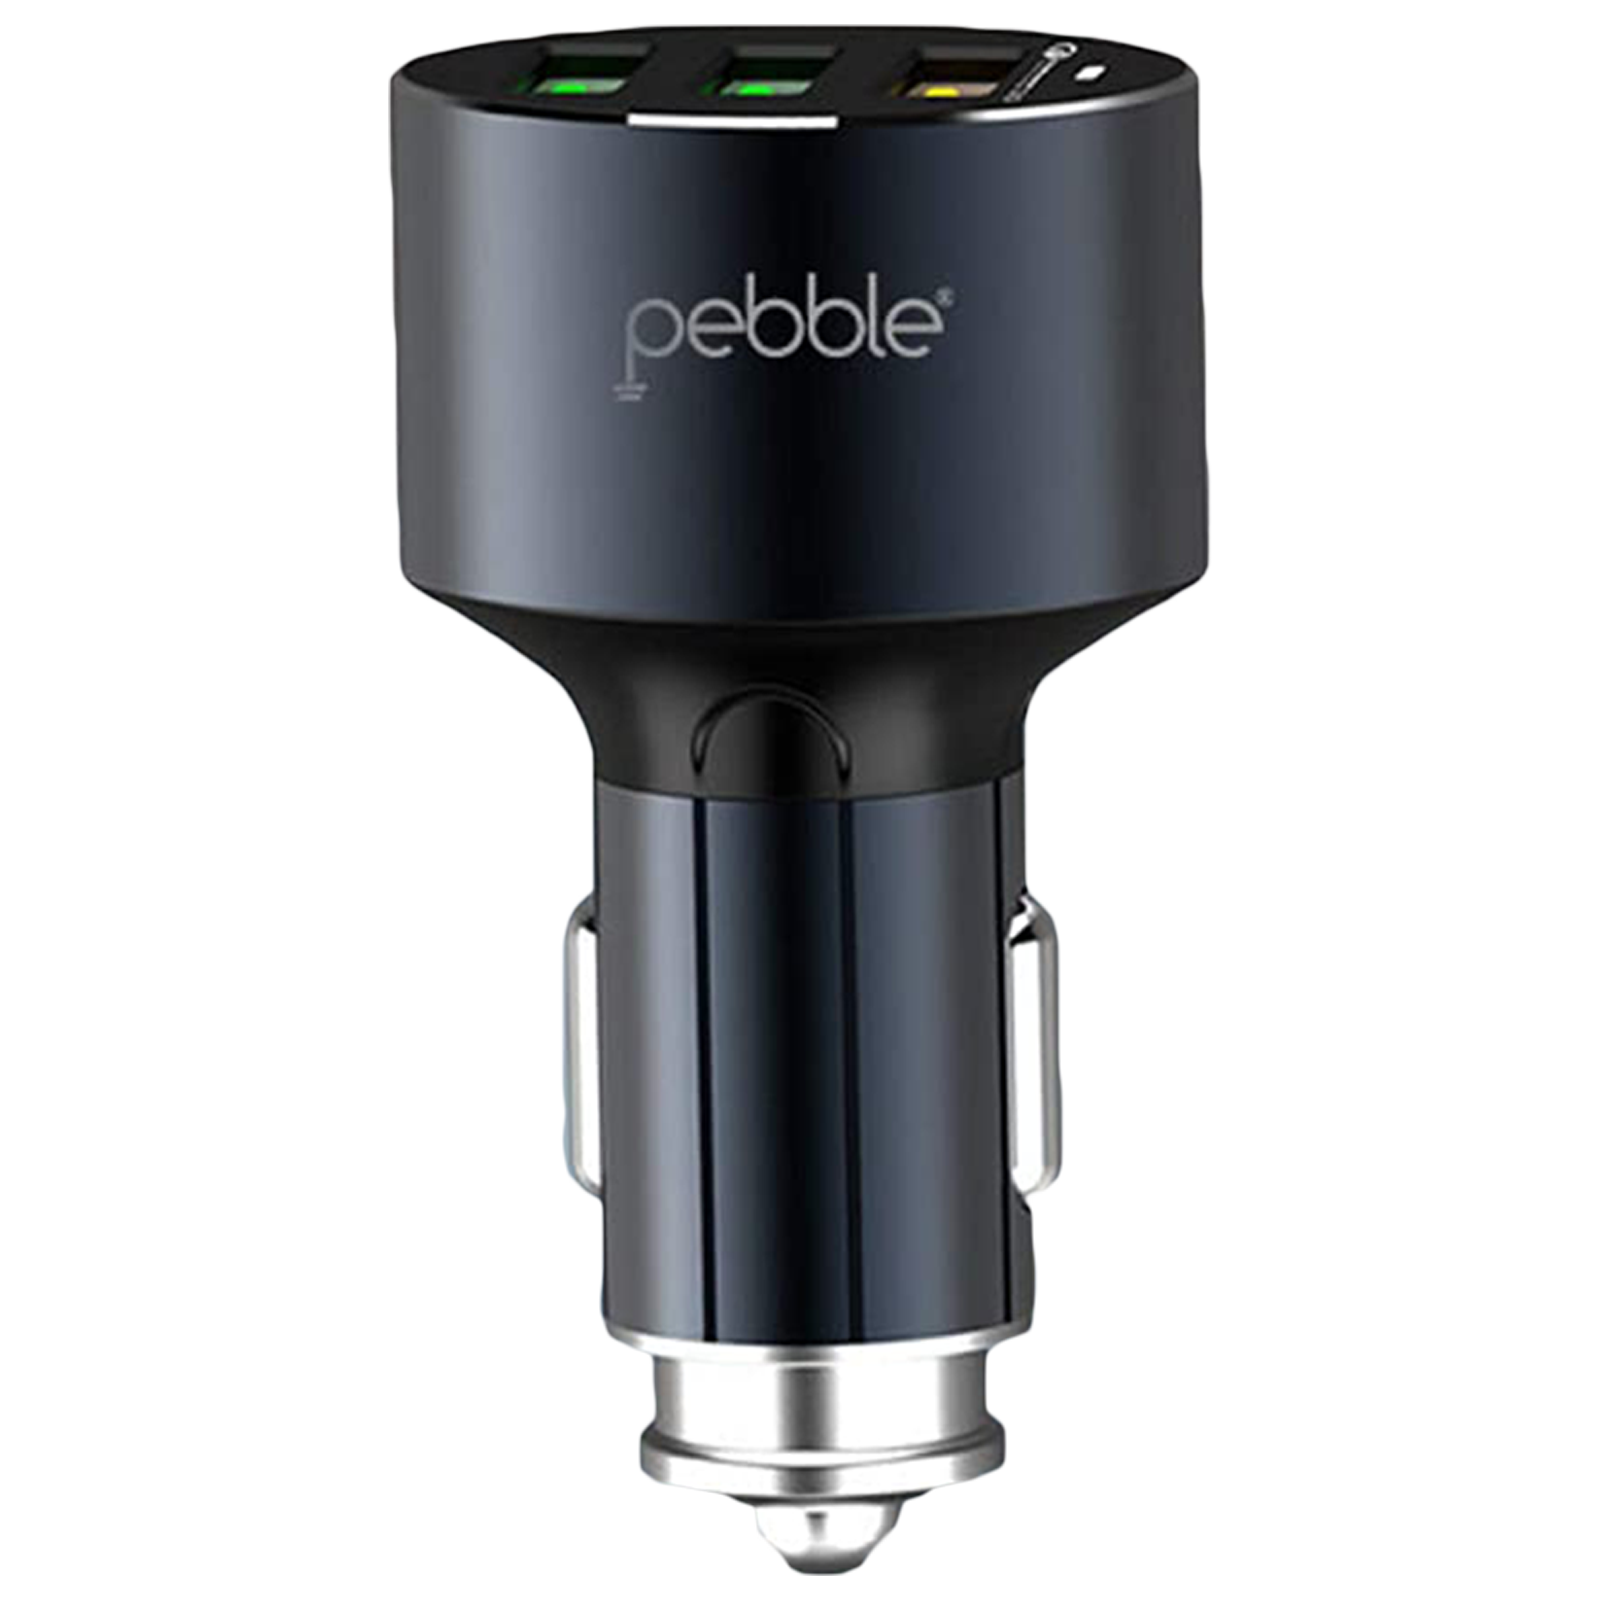 Pebble 36 Watts/3.6 Amps 3 USB Ports Car Charging Adapter with Cable (Quick Charge 3.0 Support, PCC3Q, Black)_1